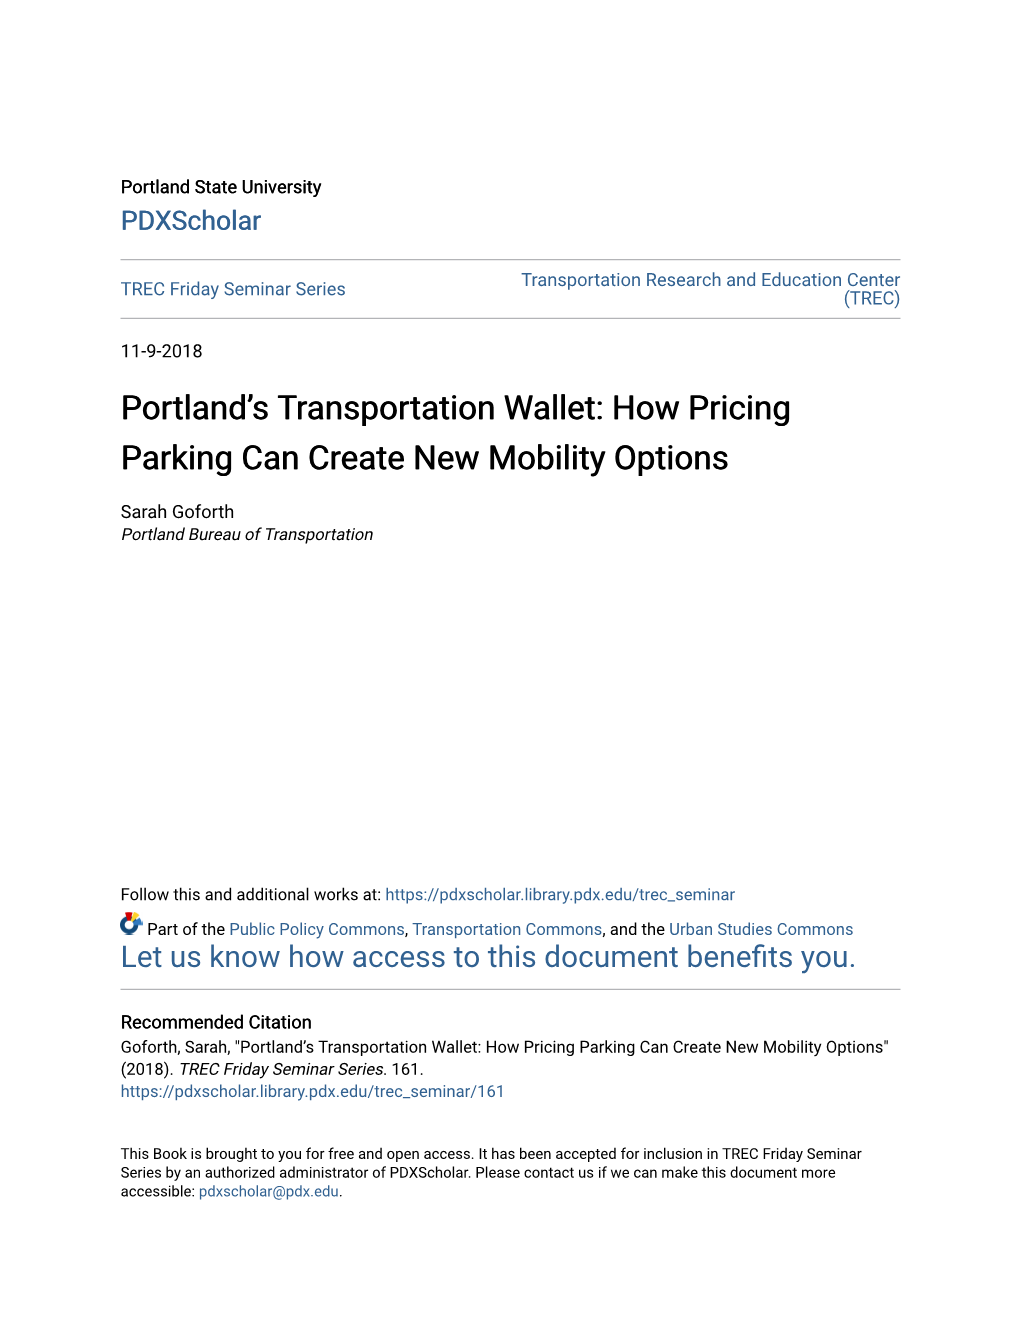 How Pricing Parking Can Create New Mobility Options